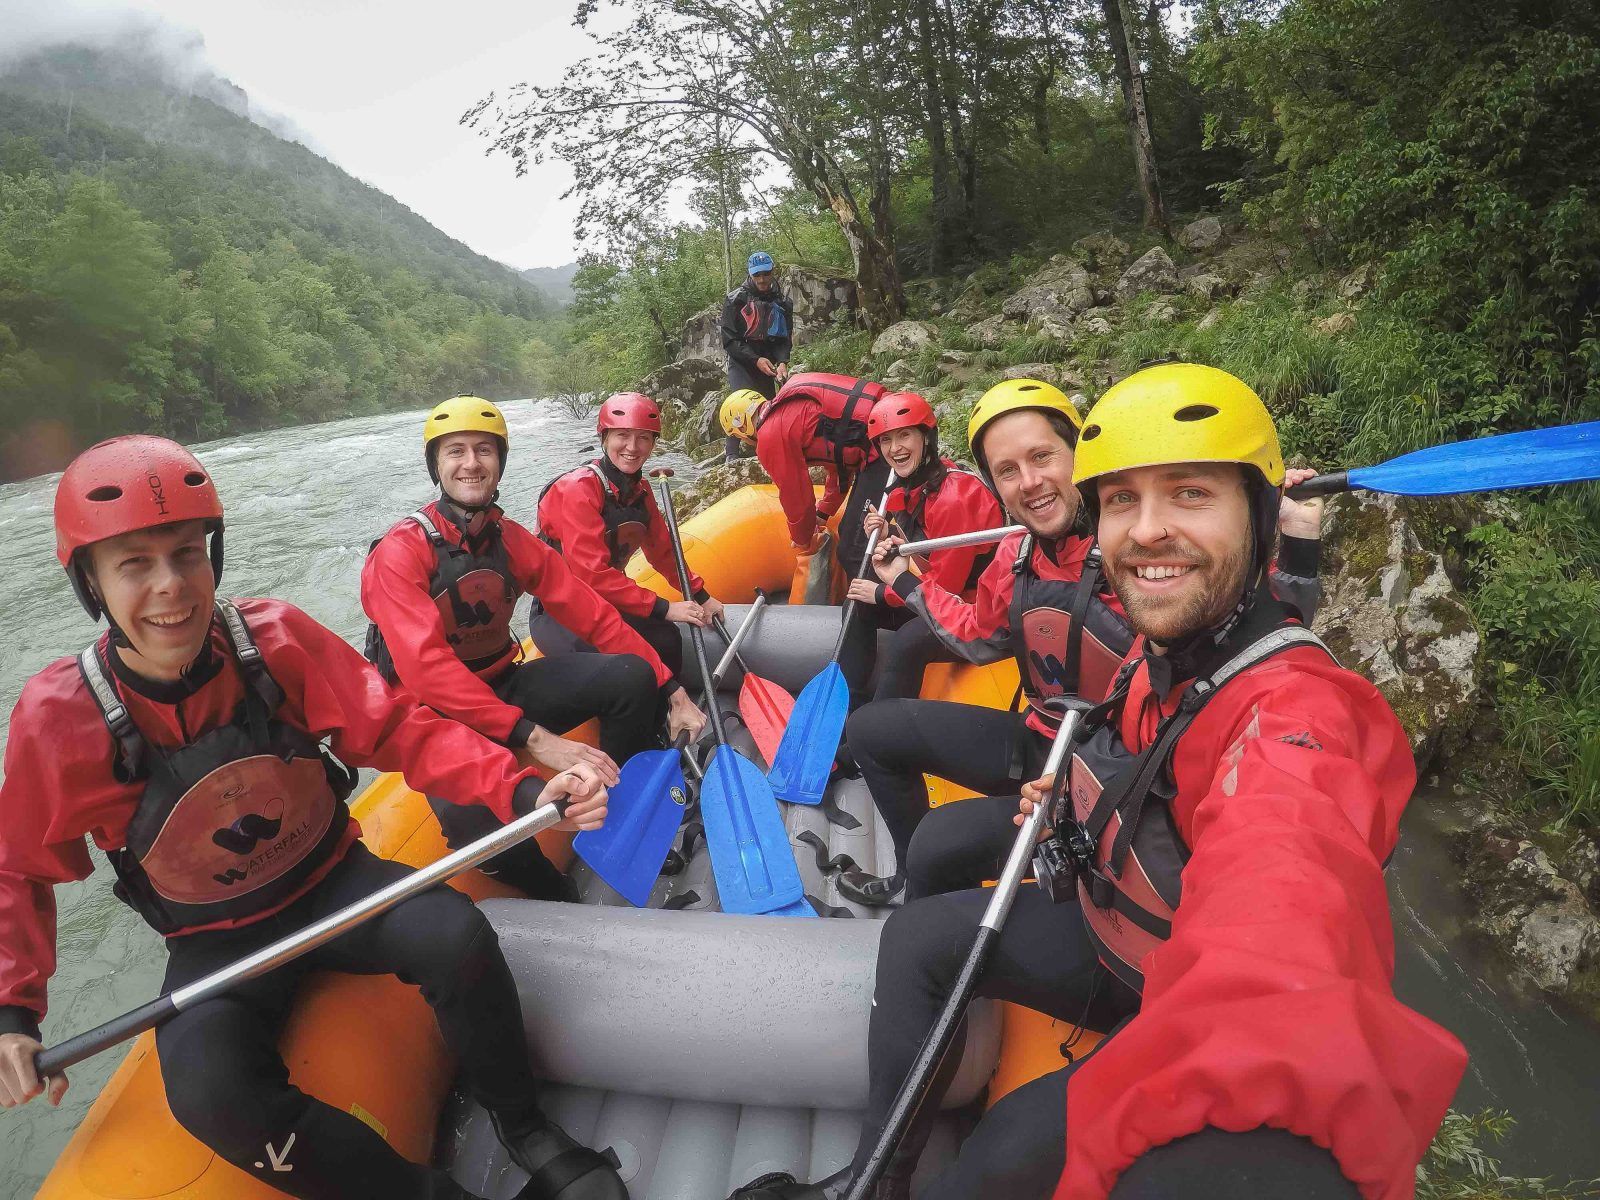 The Much Better Adventures team rafting on the Tara River in Montenegro.